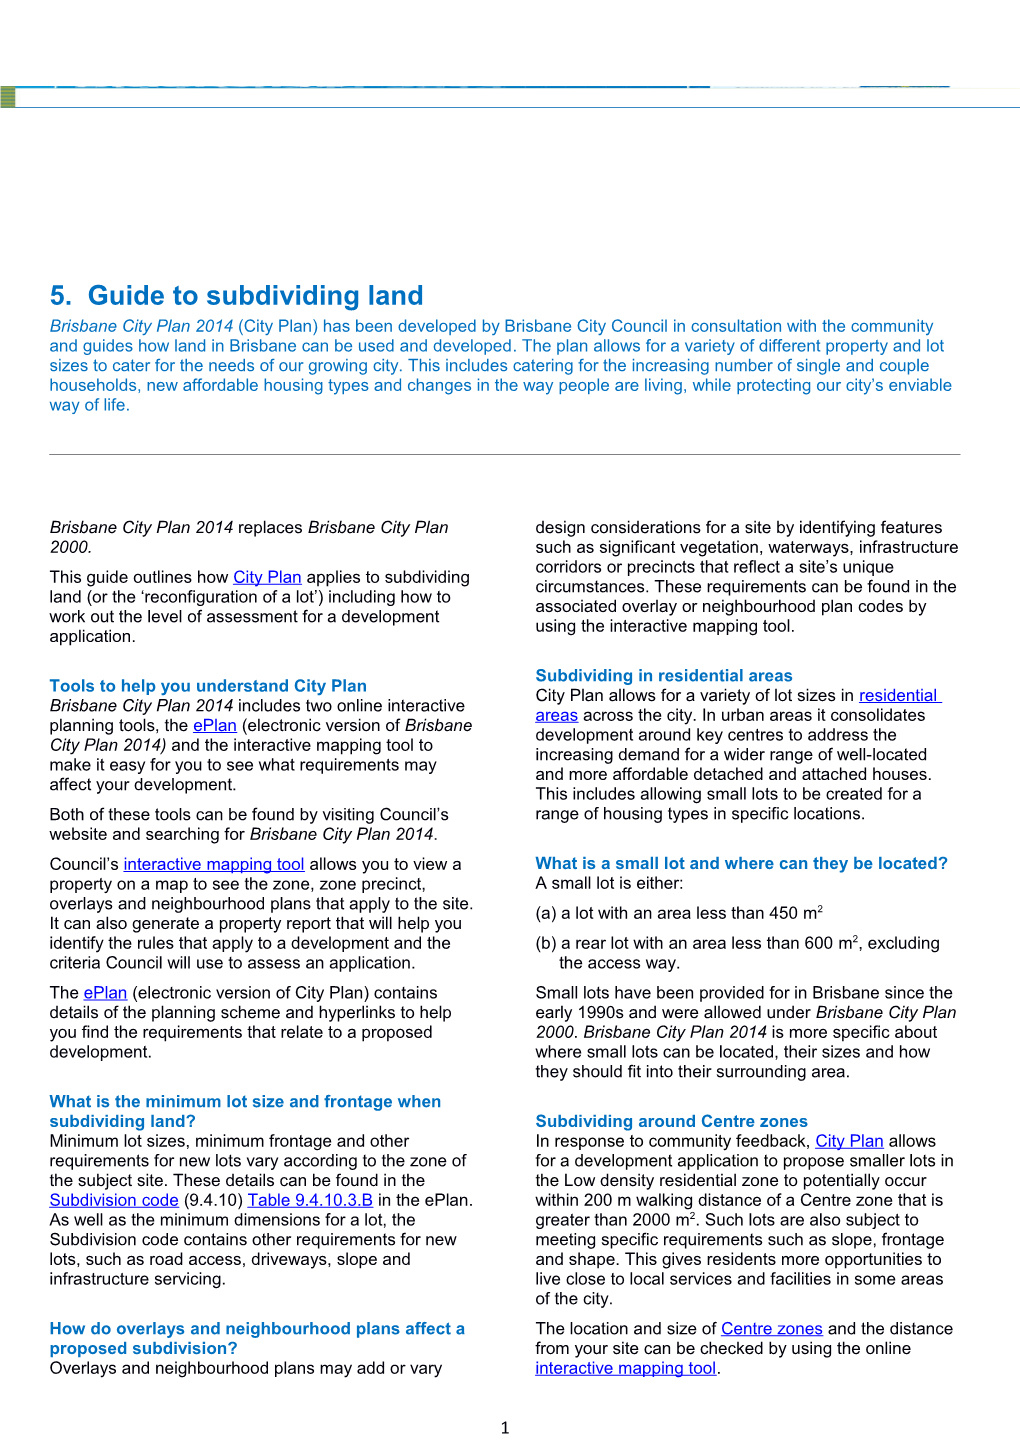 5. Guide to Subdividing Land